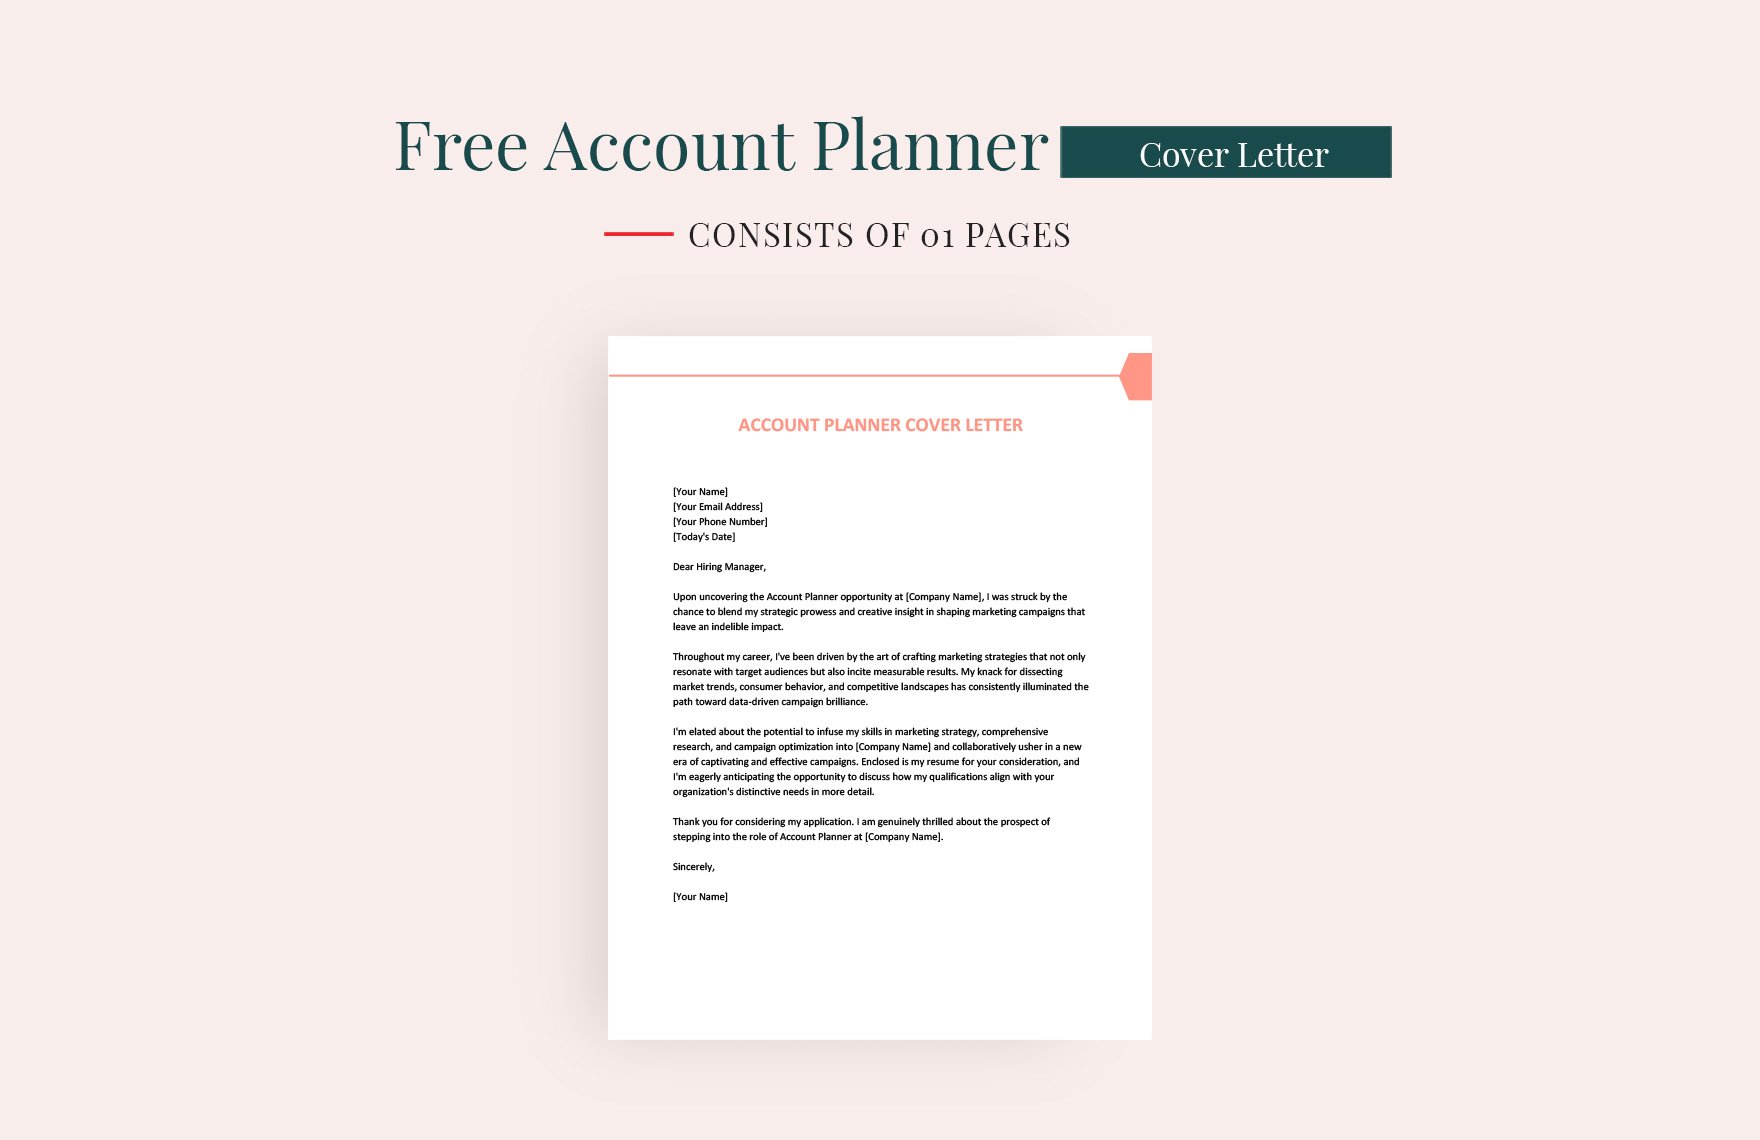 Account Planner Cover Letter